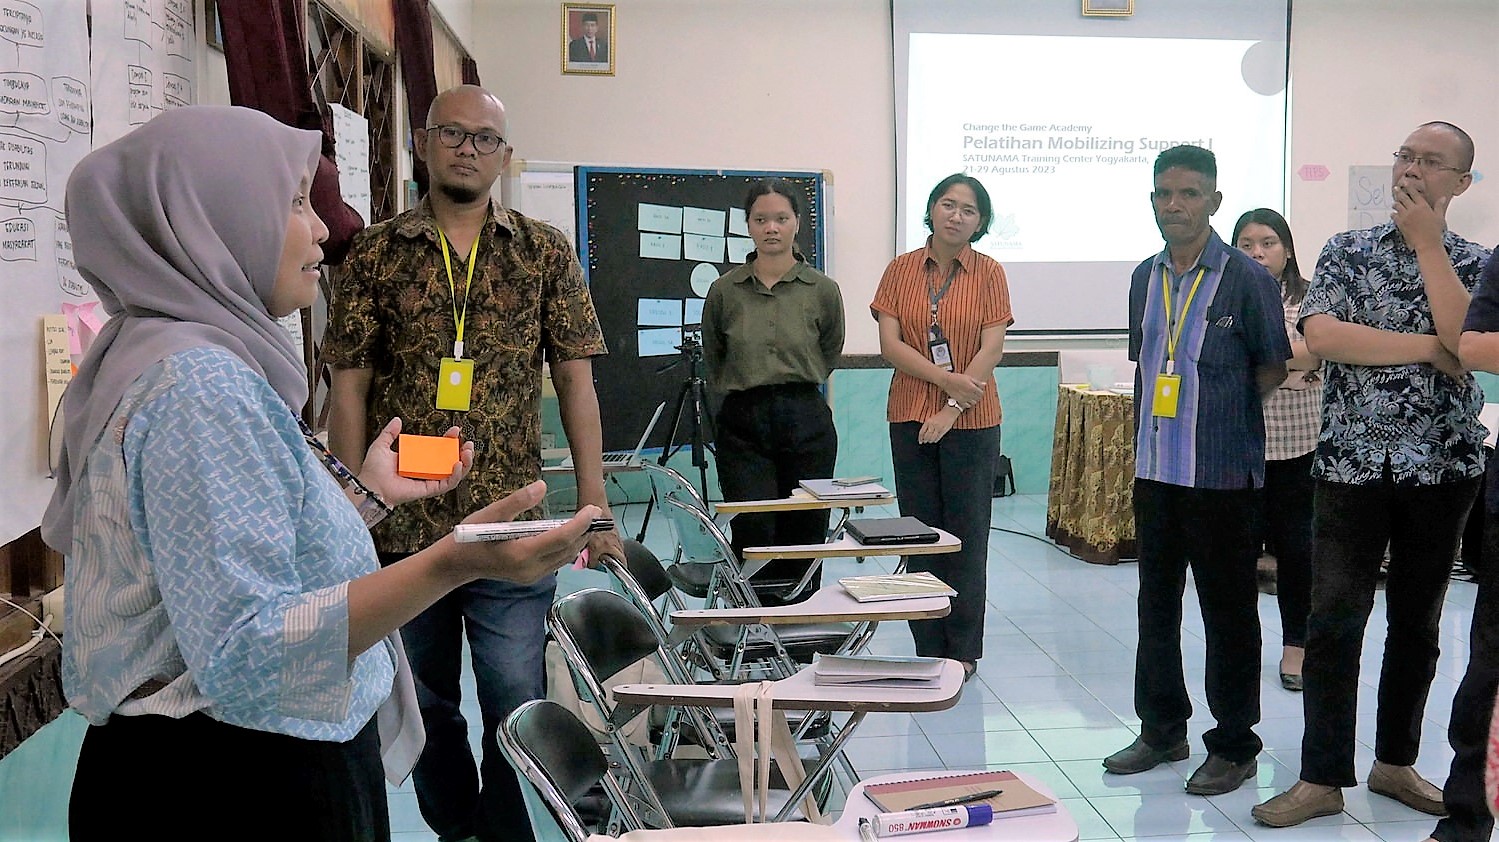 SATUNAMA Empowers Indonesian Organizations with the Change the Game Academy Mobilizing Support Training